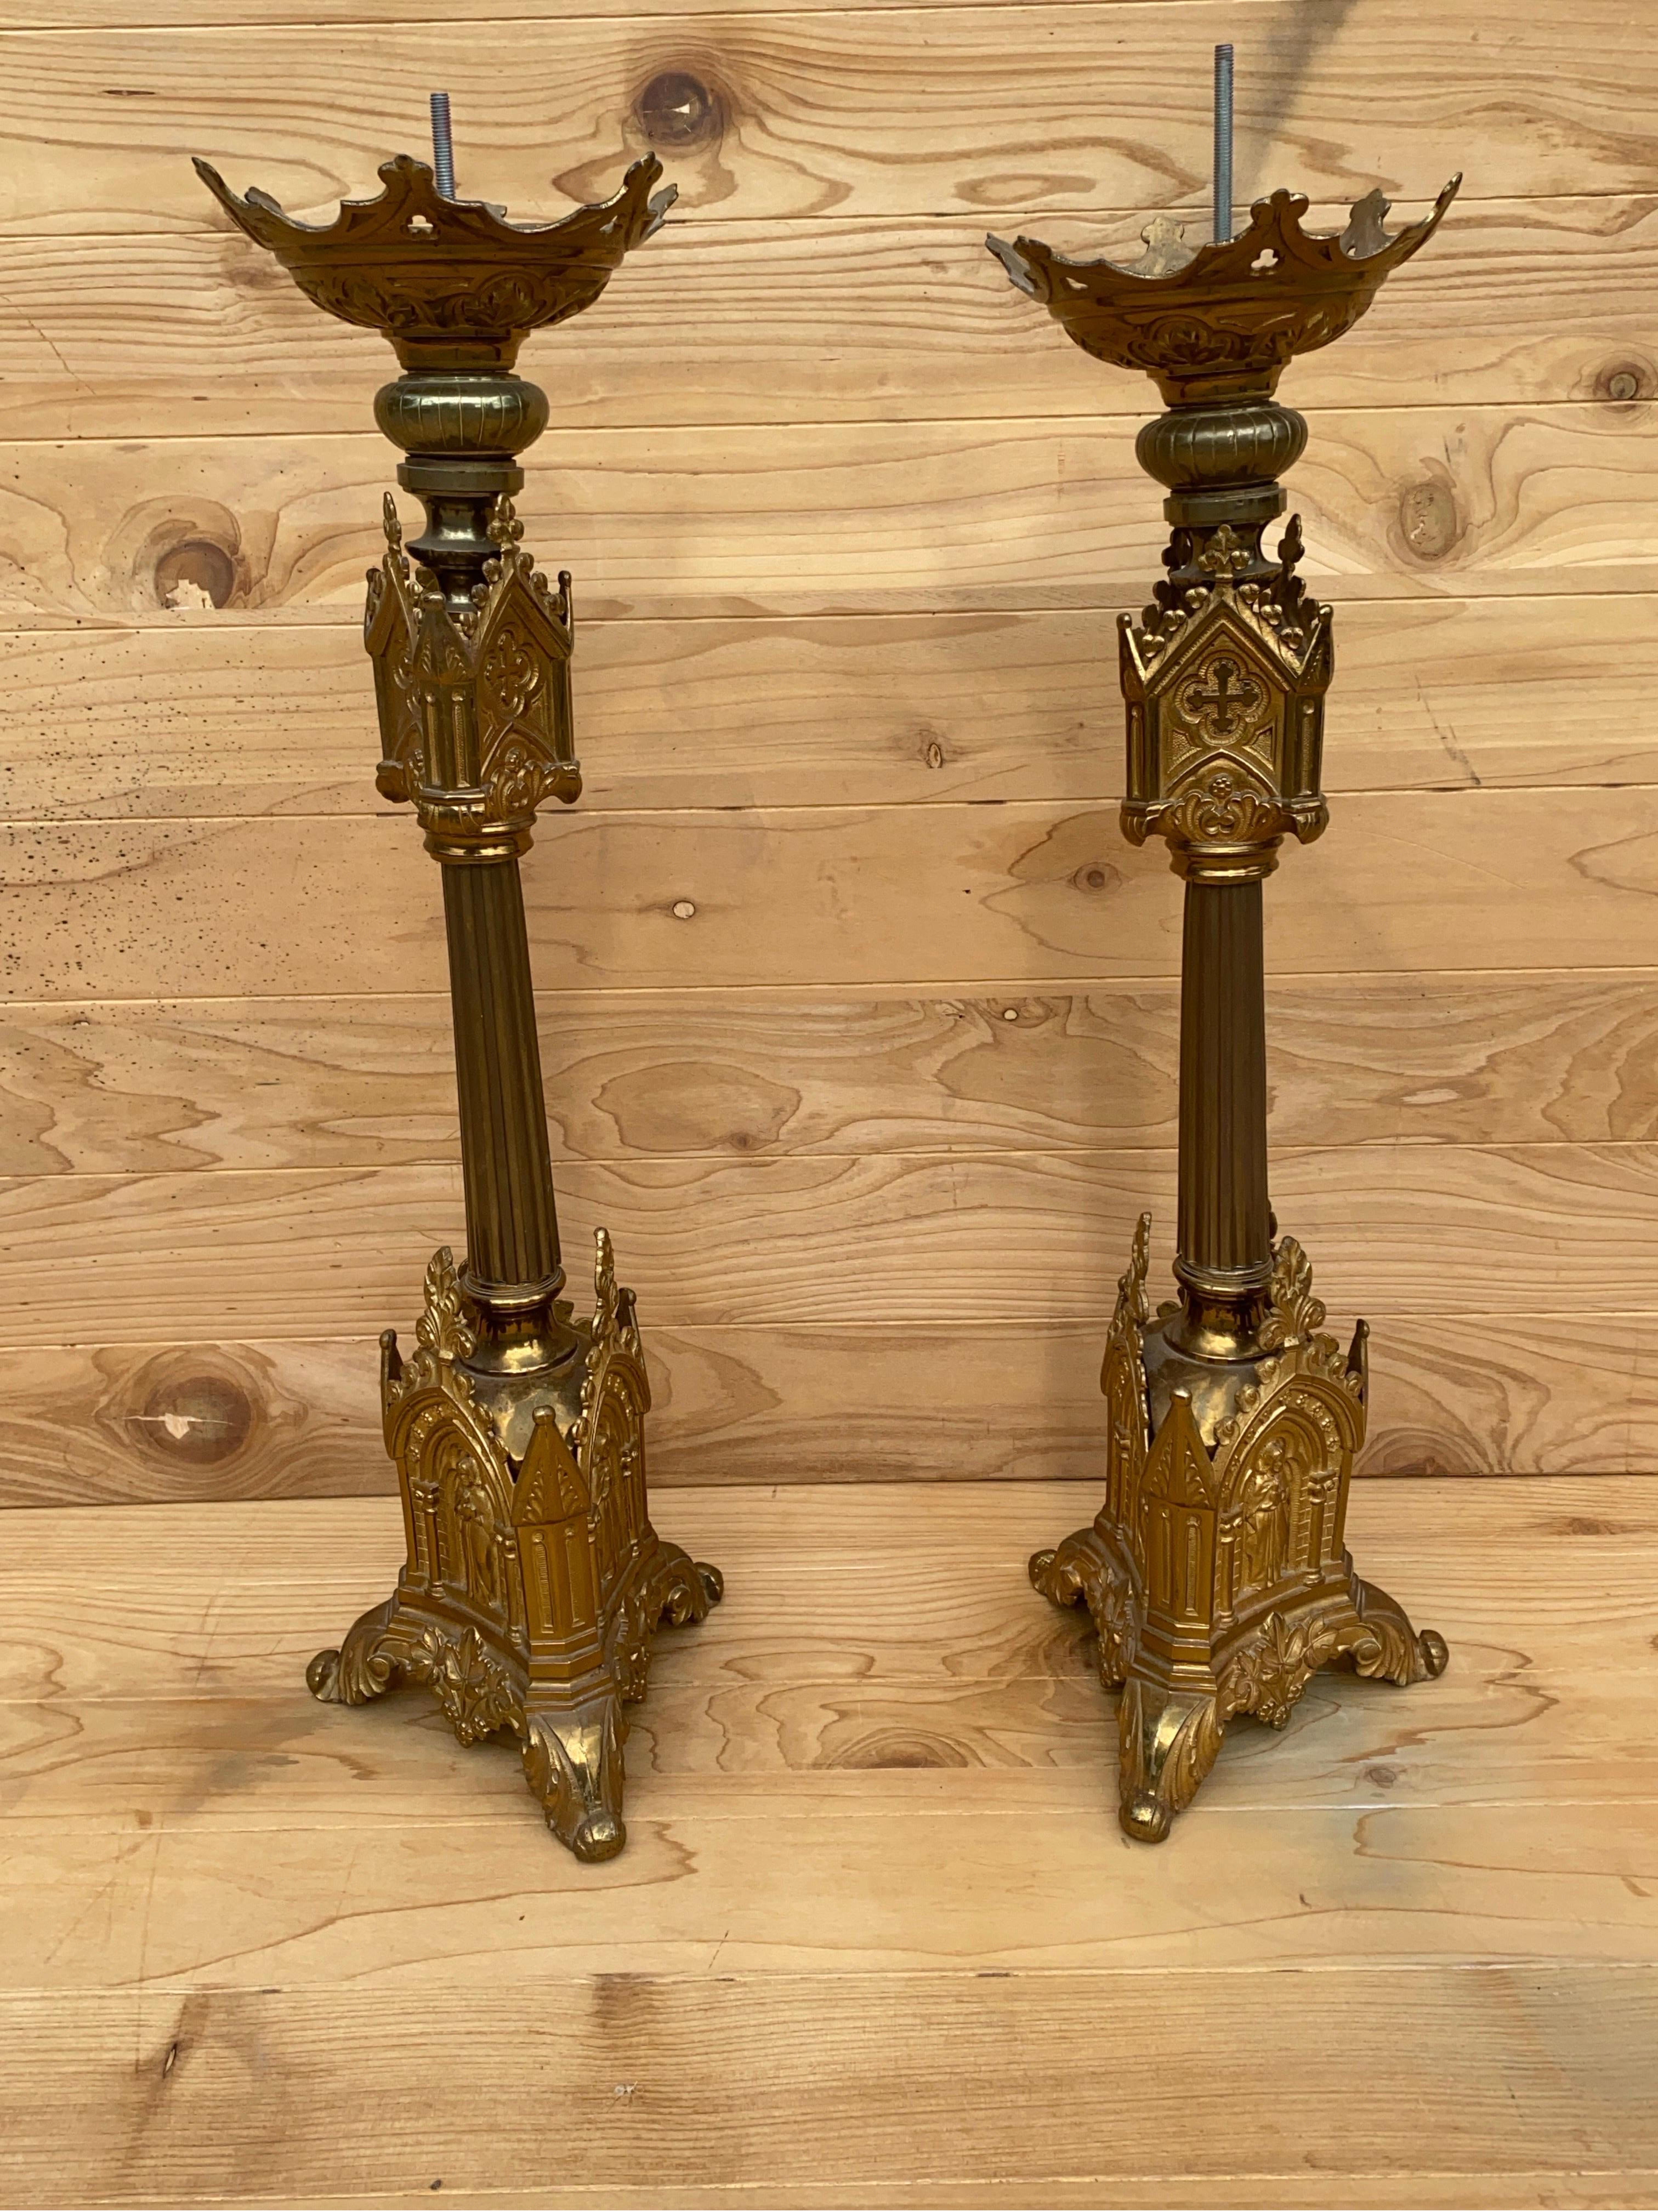 Antique French Neogothic Altar Torchère Candlestick Set w/ Jesus & Cross

This set of antique French candle holders are decorated with images of Jesus and crosses. Each candlestick rests on a three-legged base, and the top has a plate to catch wax.